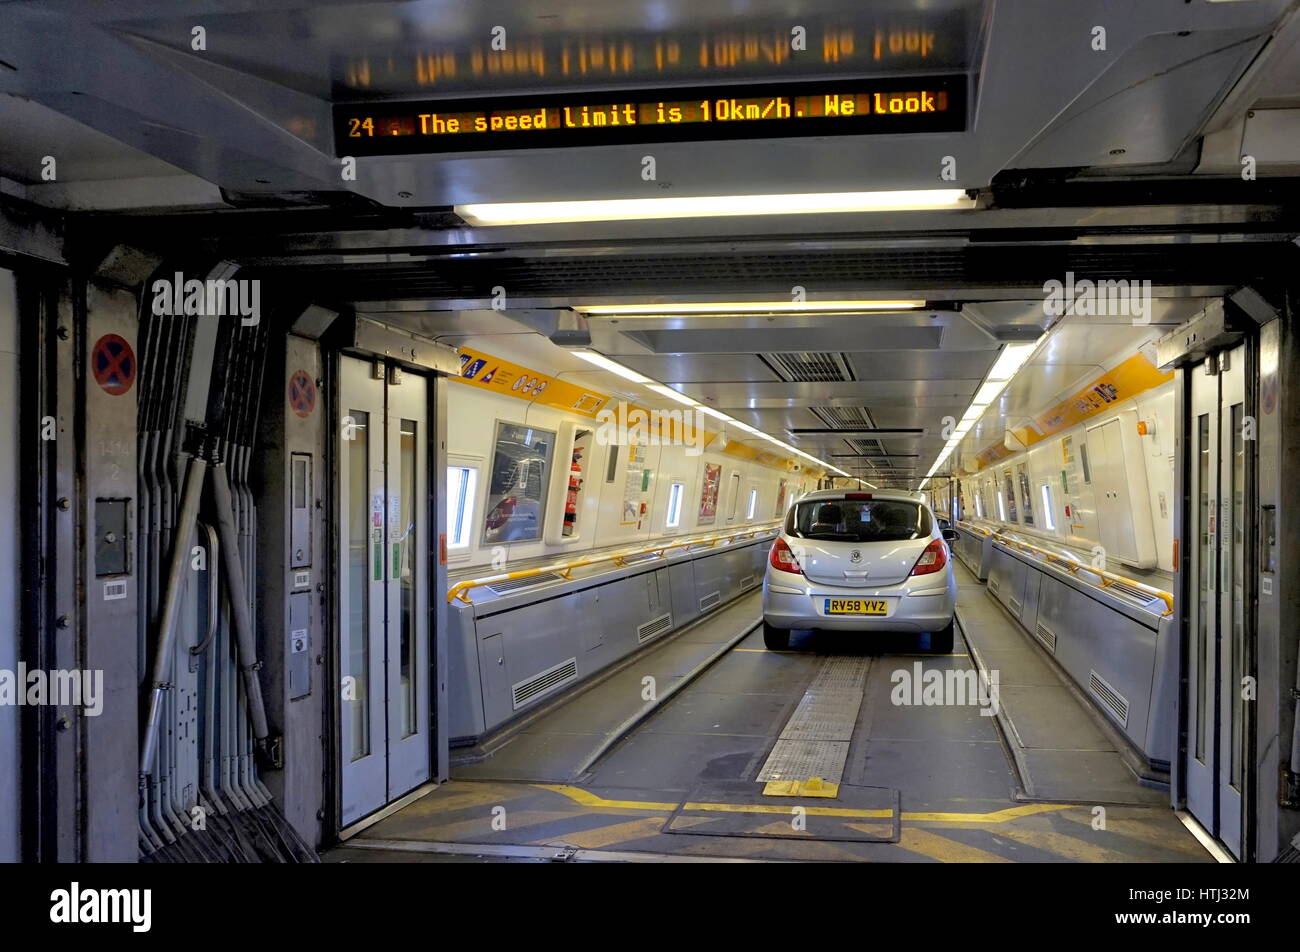 FOLKESTONE, ENGLAND, MAY 07 2016: Doors between carriages on the Euro Tunnel train from France to Folkestone in the United Kingdom are open as the car Stock Photo